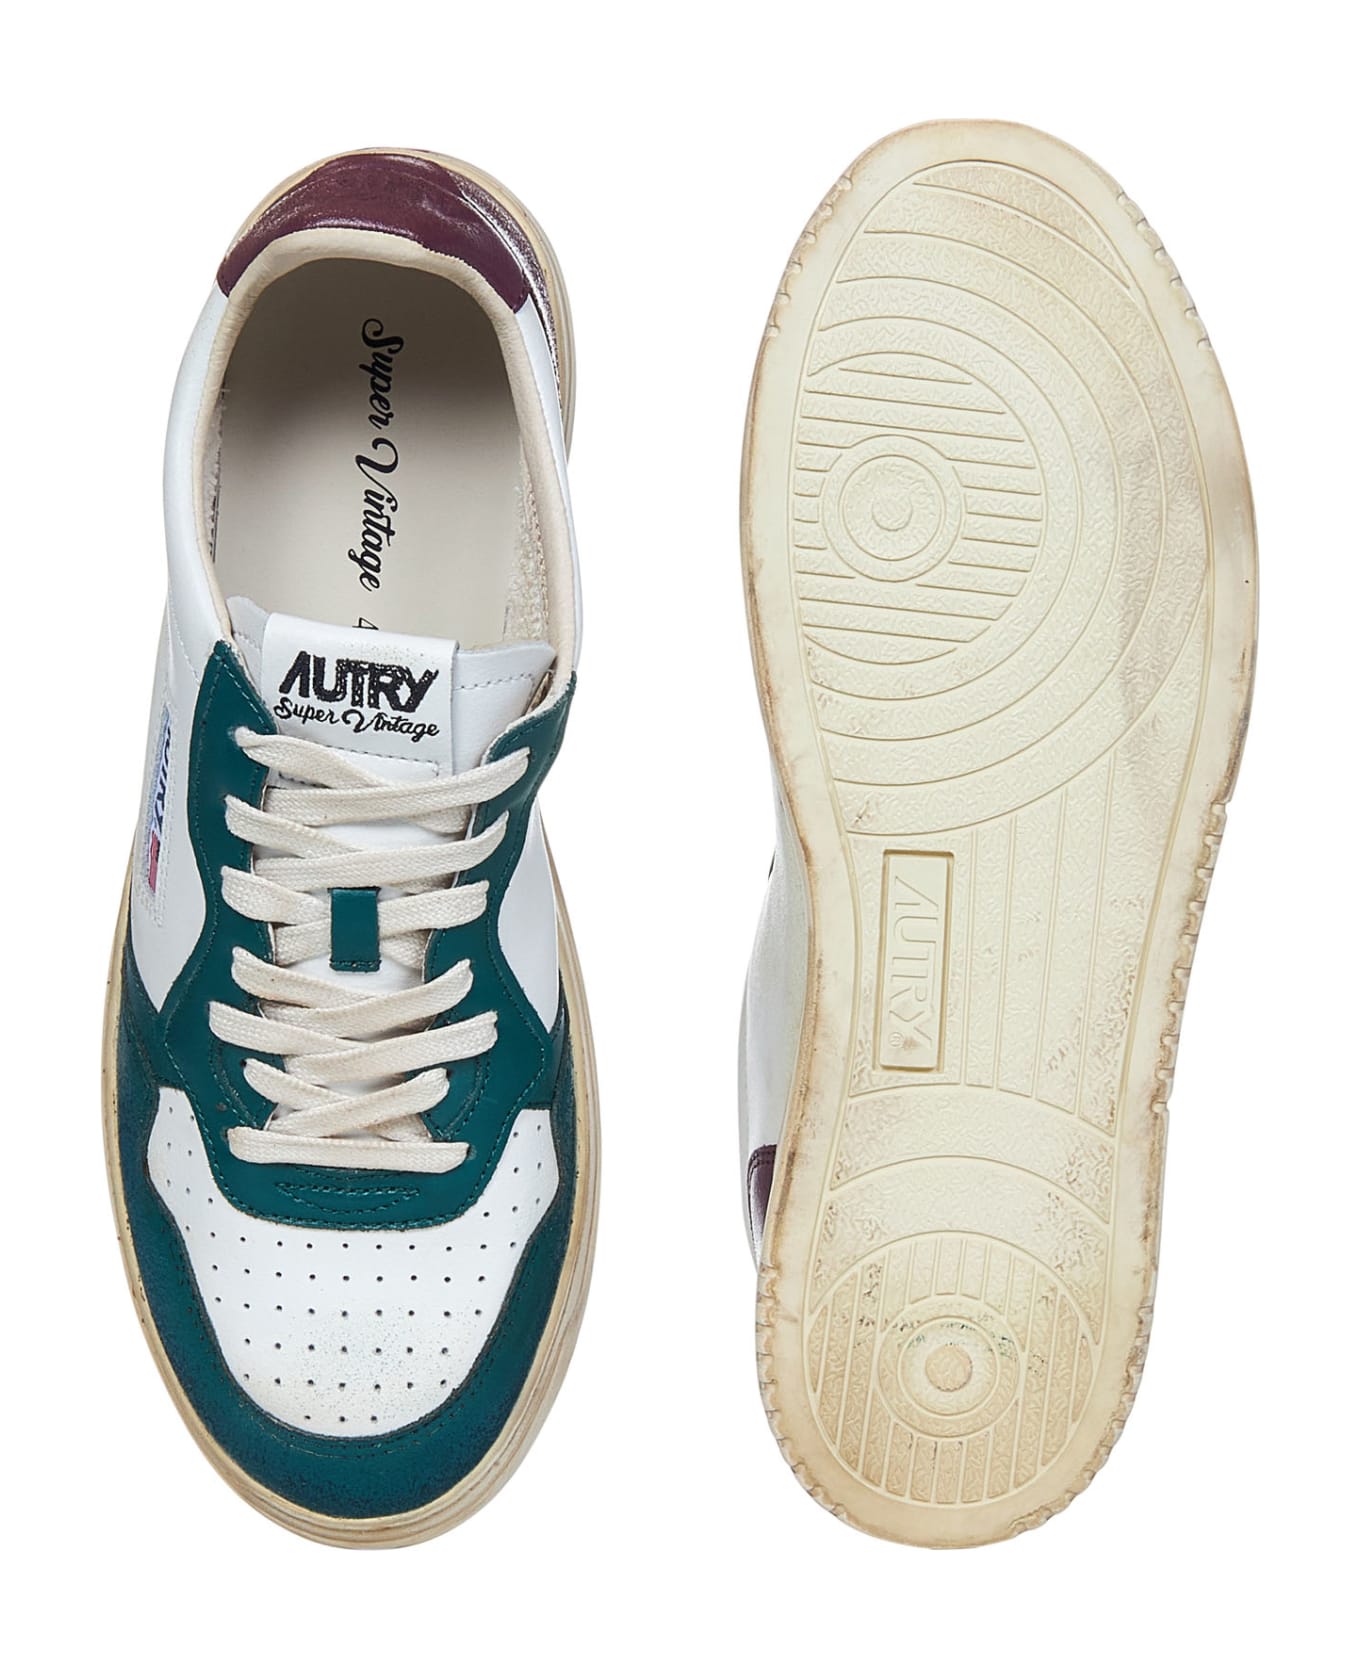 Autry Super Vintage Sneakers - White